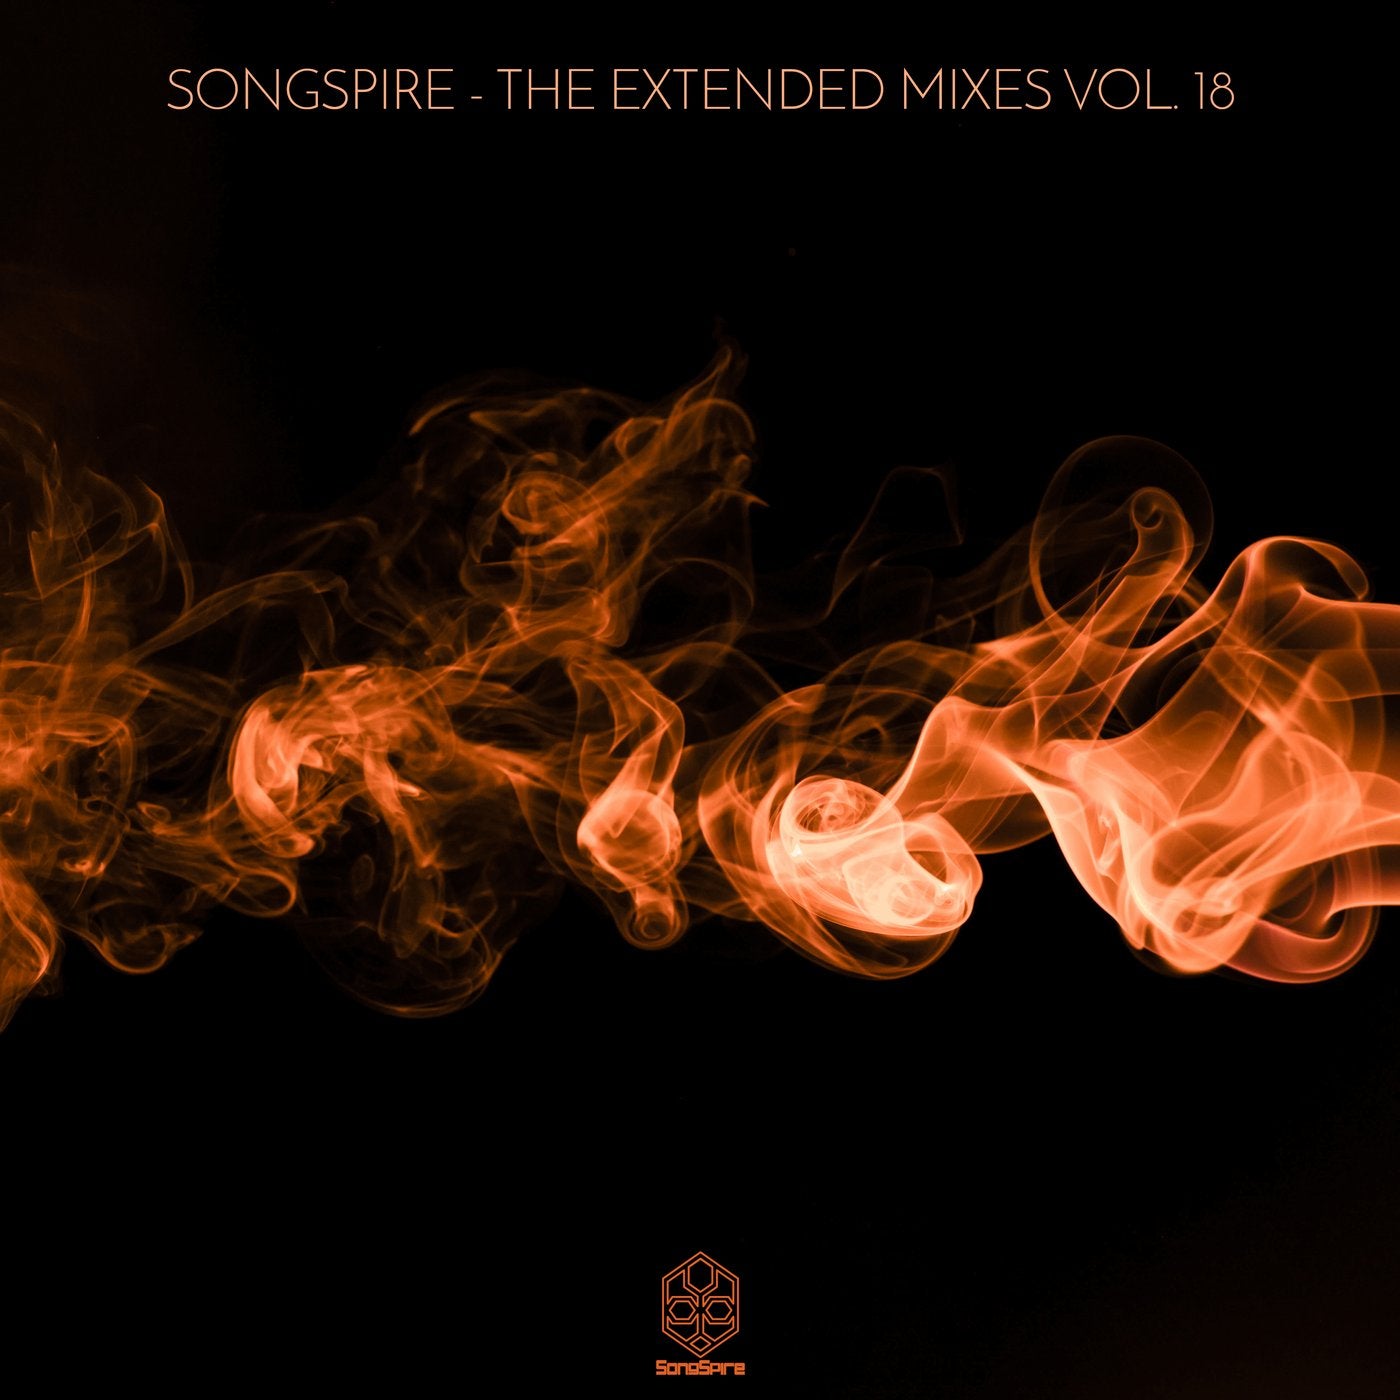 Songspire Records - The Extended Mixes Vol. 18